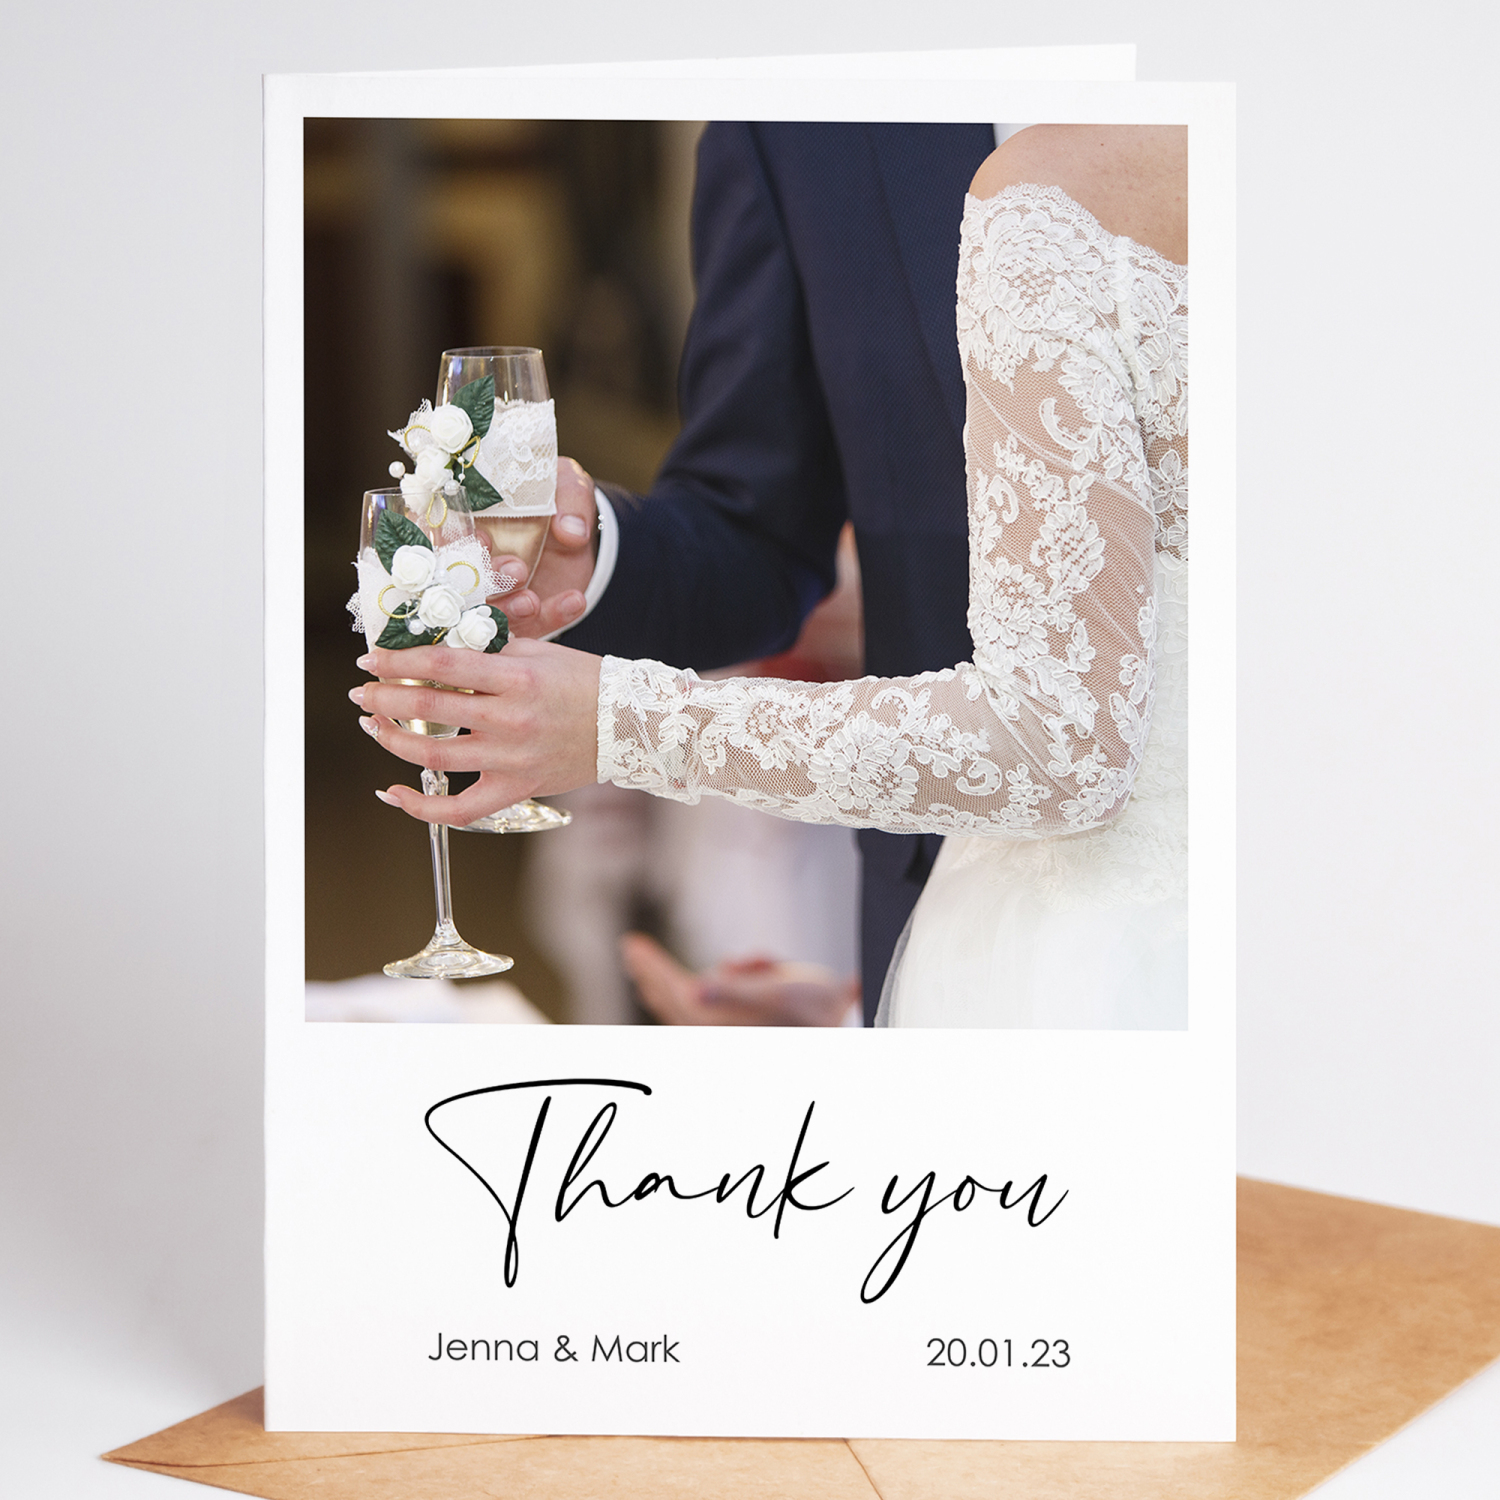 Thank You Wedding Cards Personalised Photo Wedding Cards - A6 - 4.1" x 5.8"